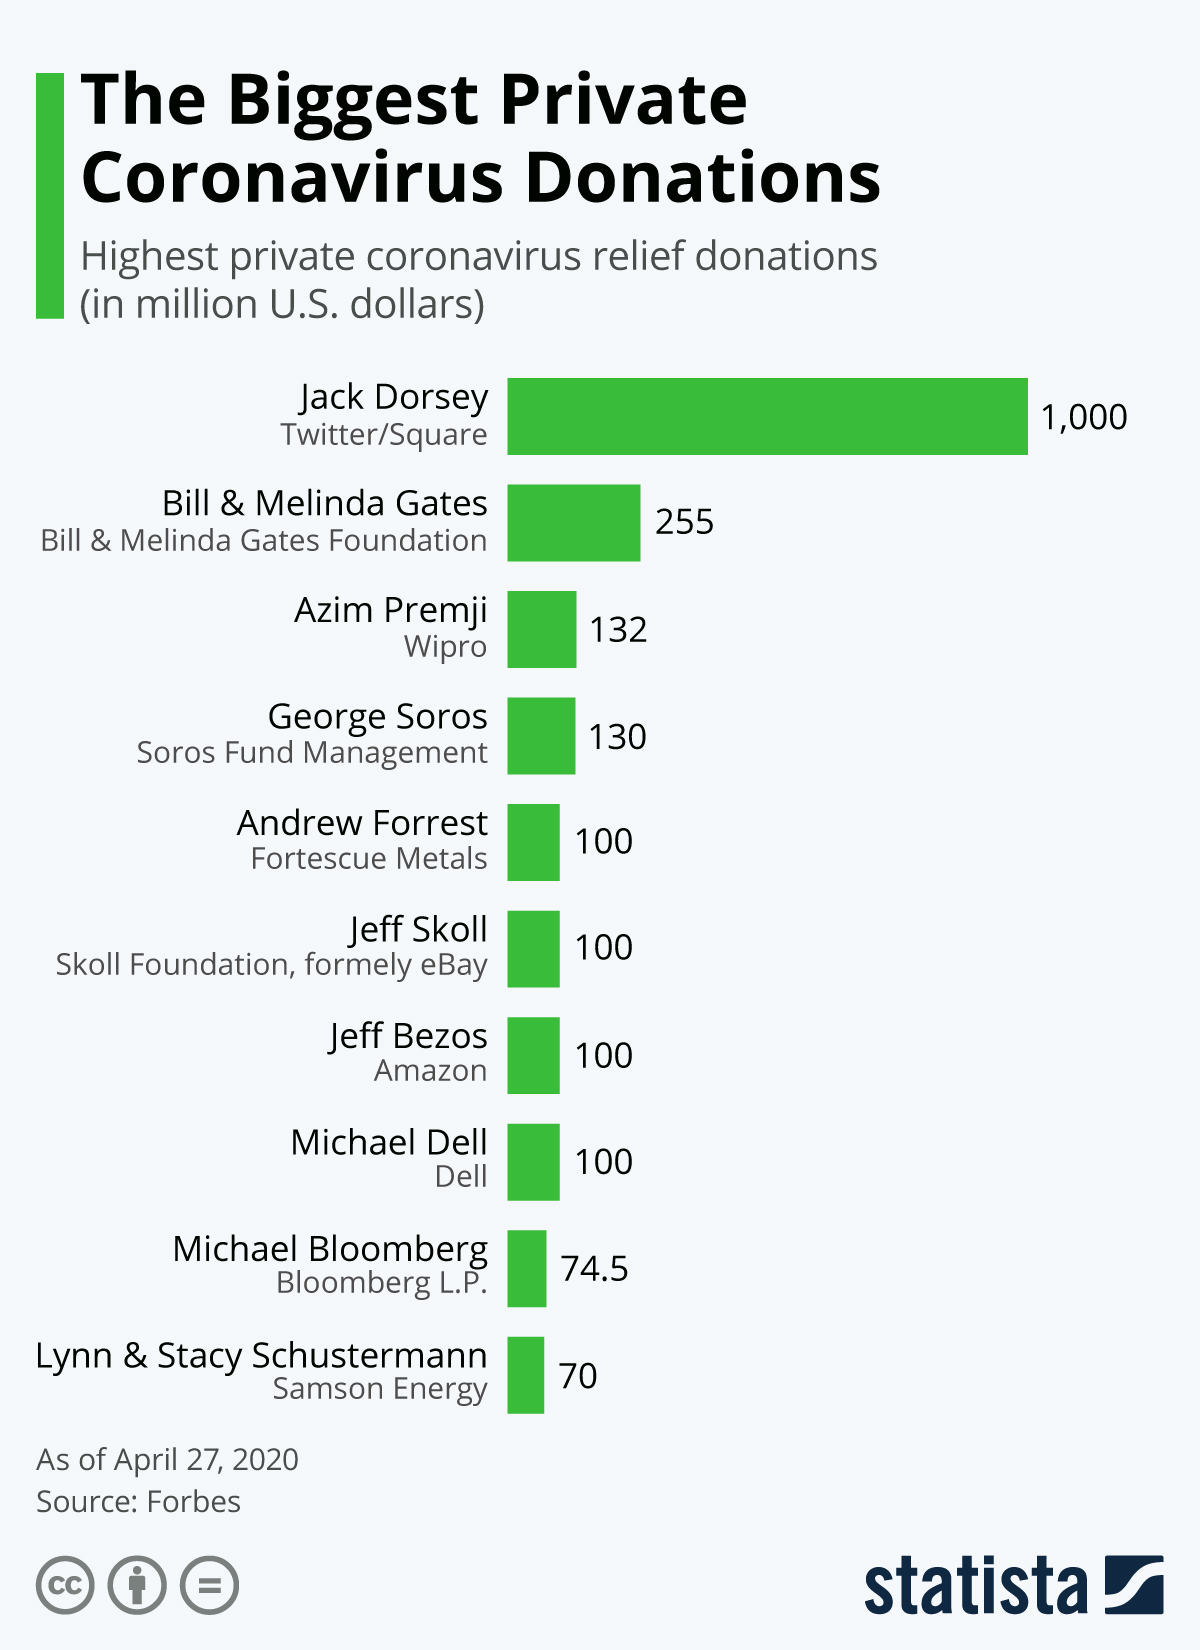 COVID-19: Gates, Dorsey and 8 others are now the top 10 private donators worldwide